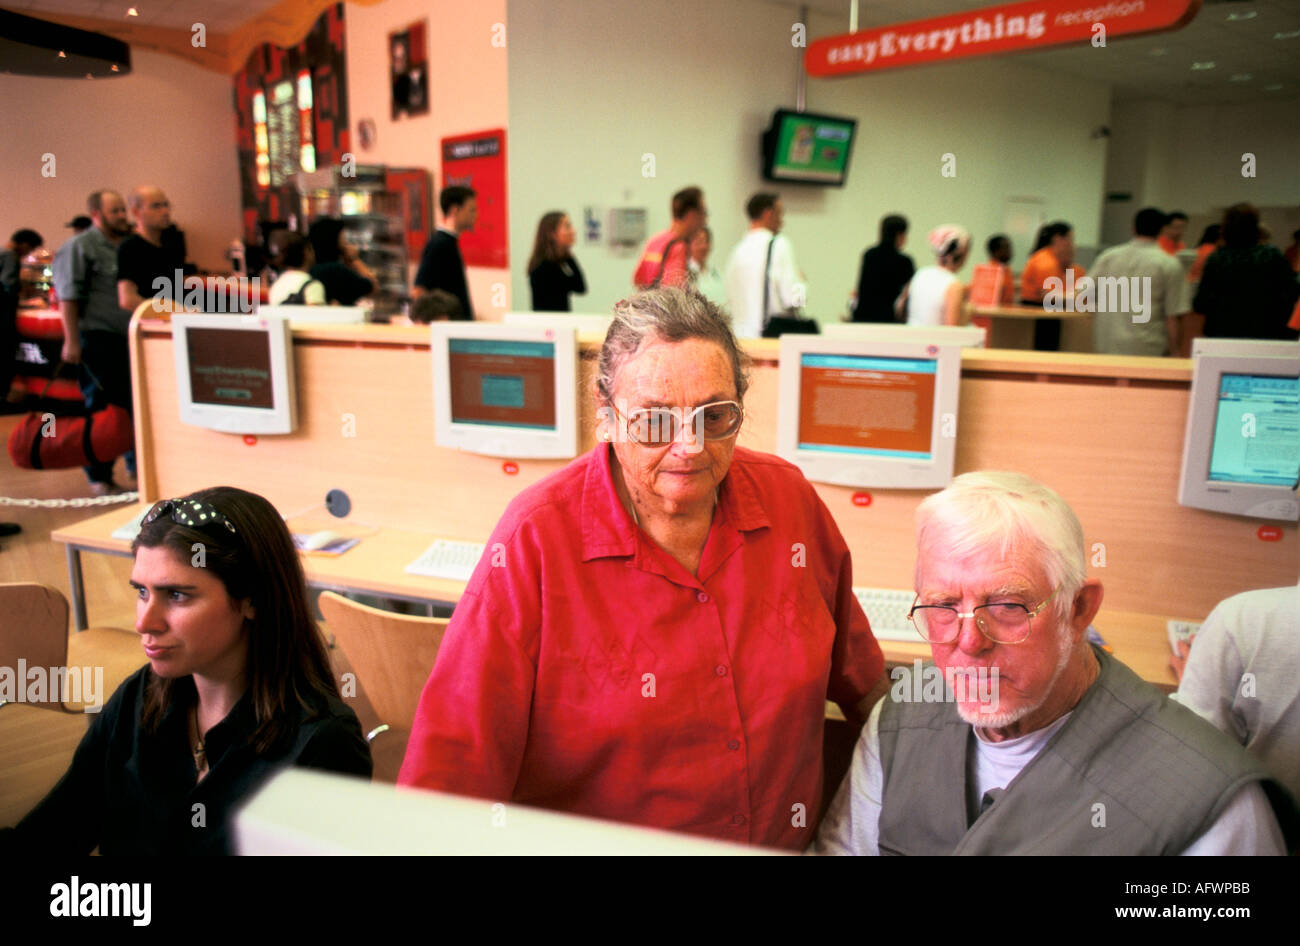 World Wide Web Internet cafe London UK 1990s. Elderly couple using computers, customers background queue up for cafe service. 1999 England HOMER SYKES Stock Photo